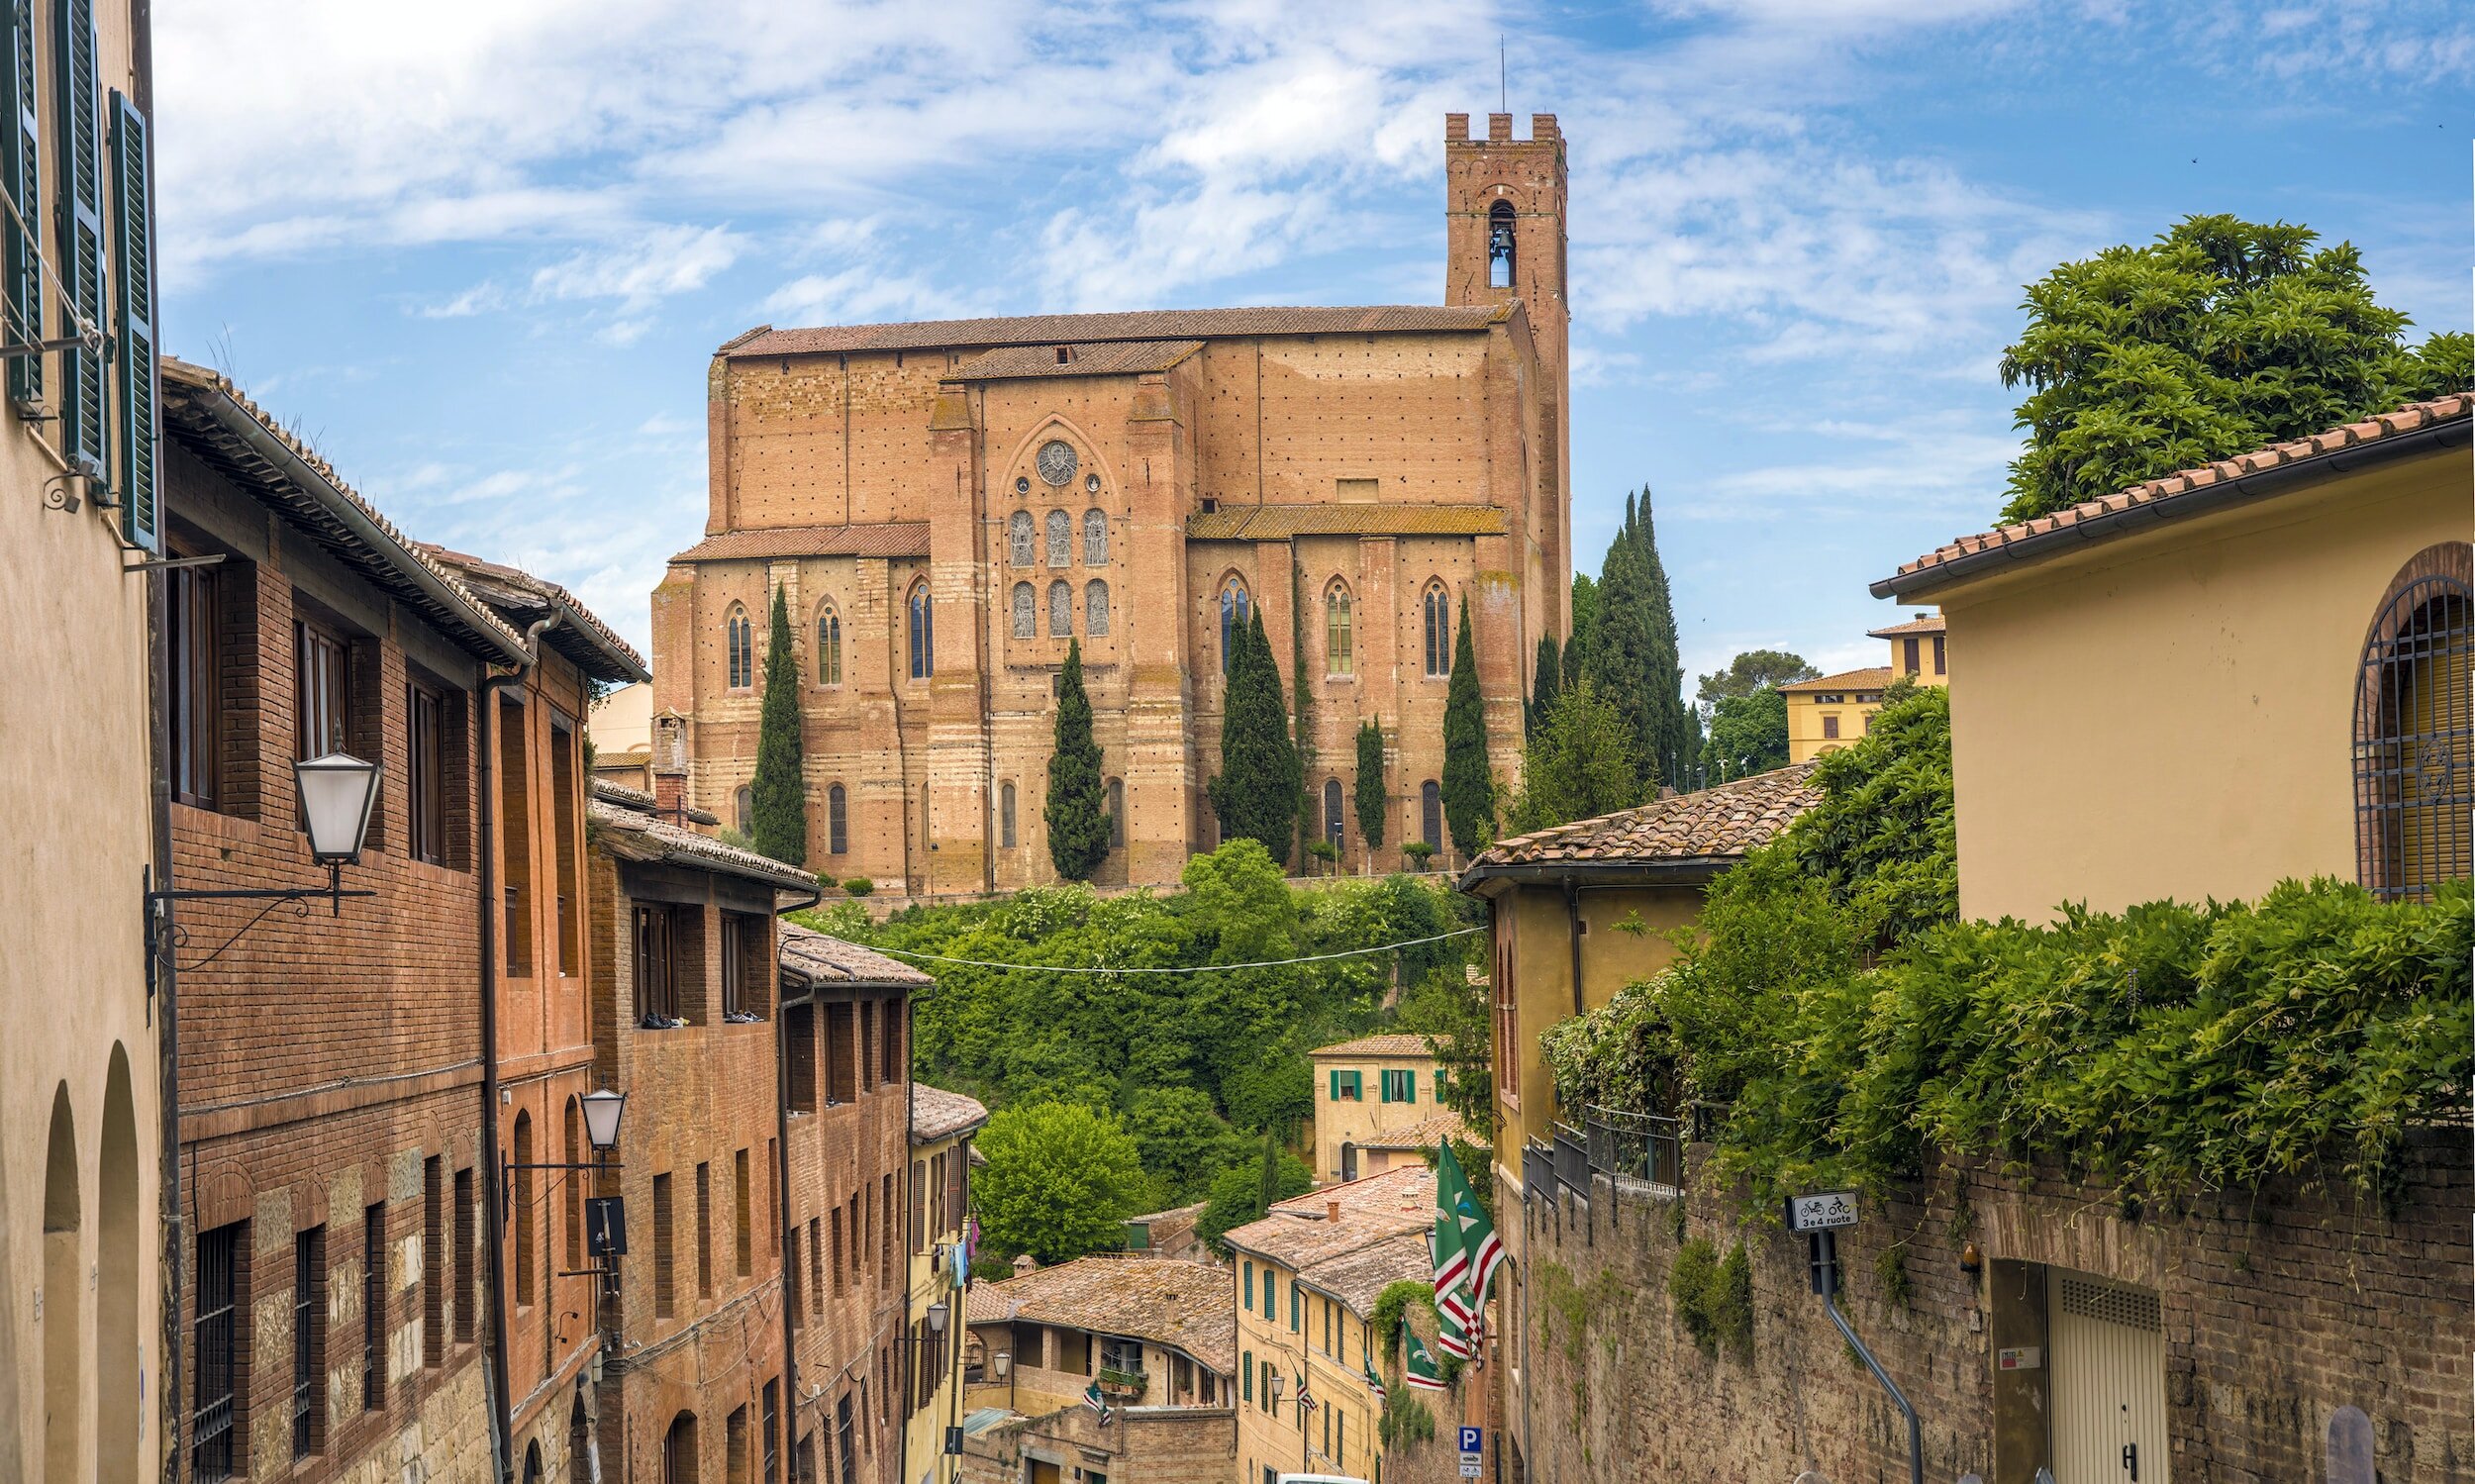 The enormous Basilica Cateriniana di San Domenico in Siena, Itlay, seen from a nearby street towering over the city